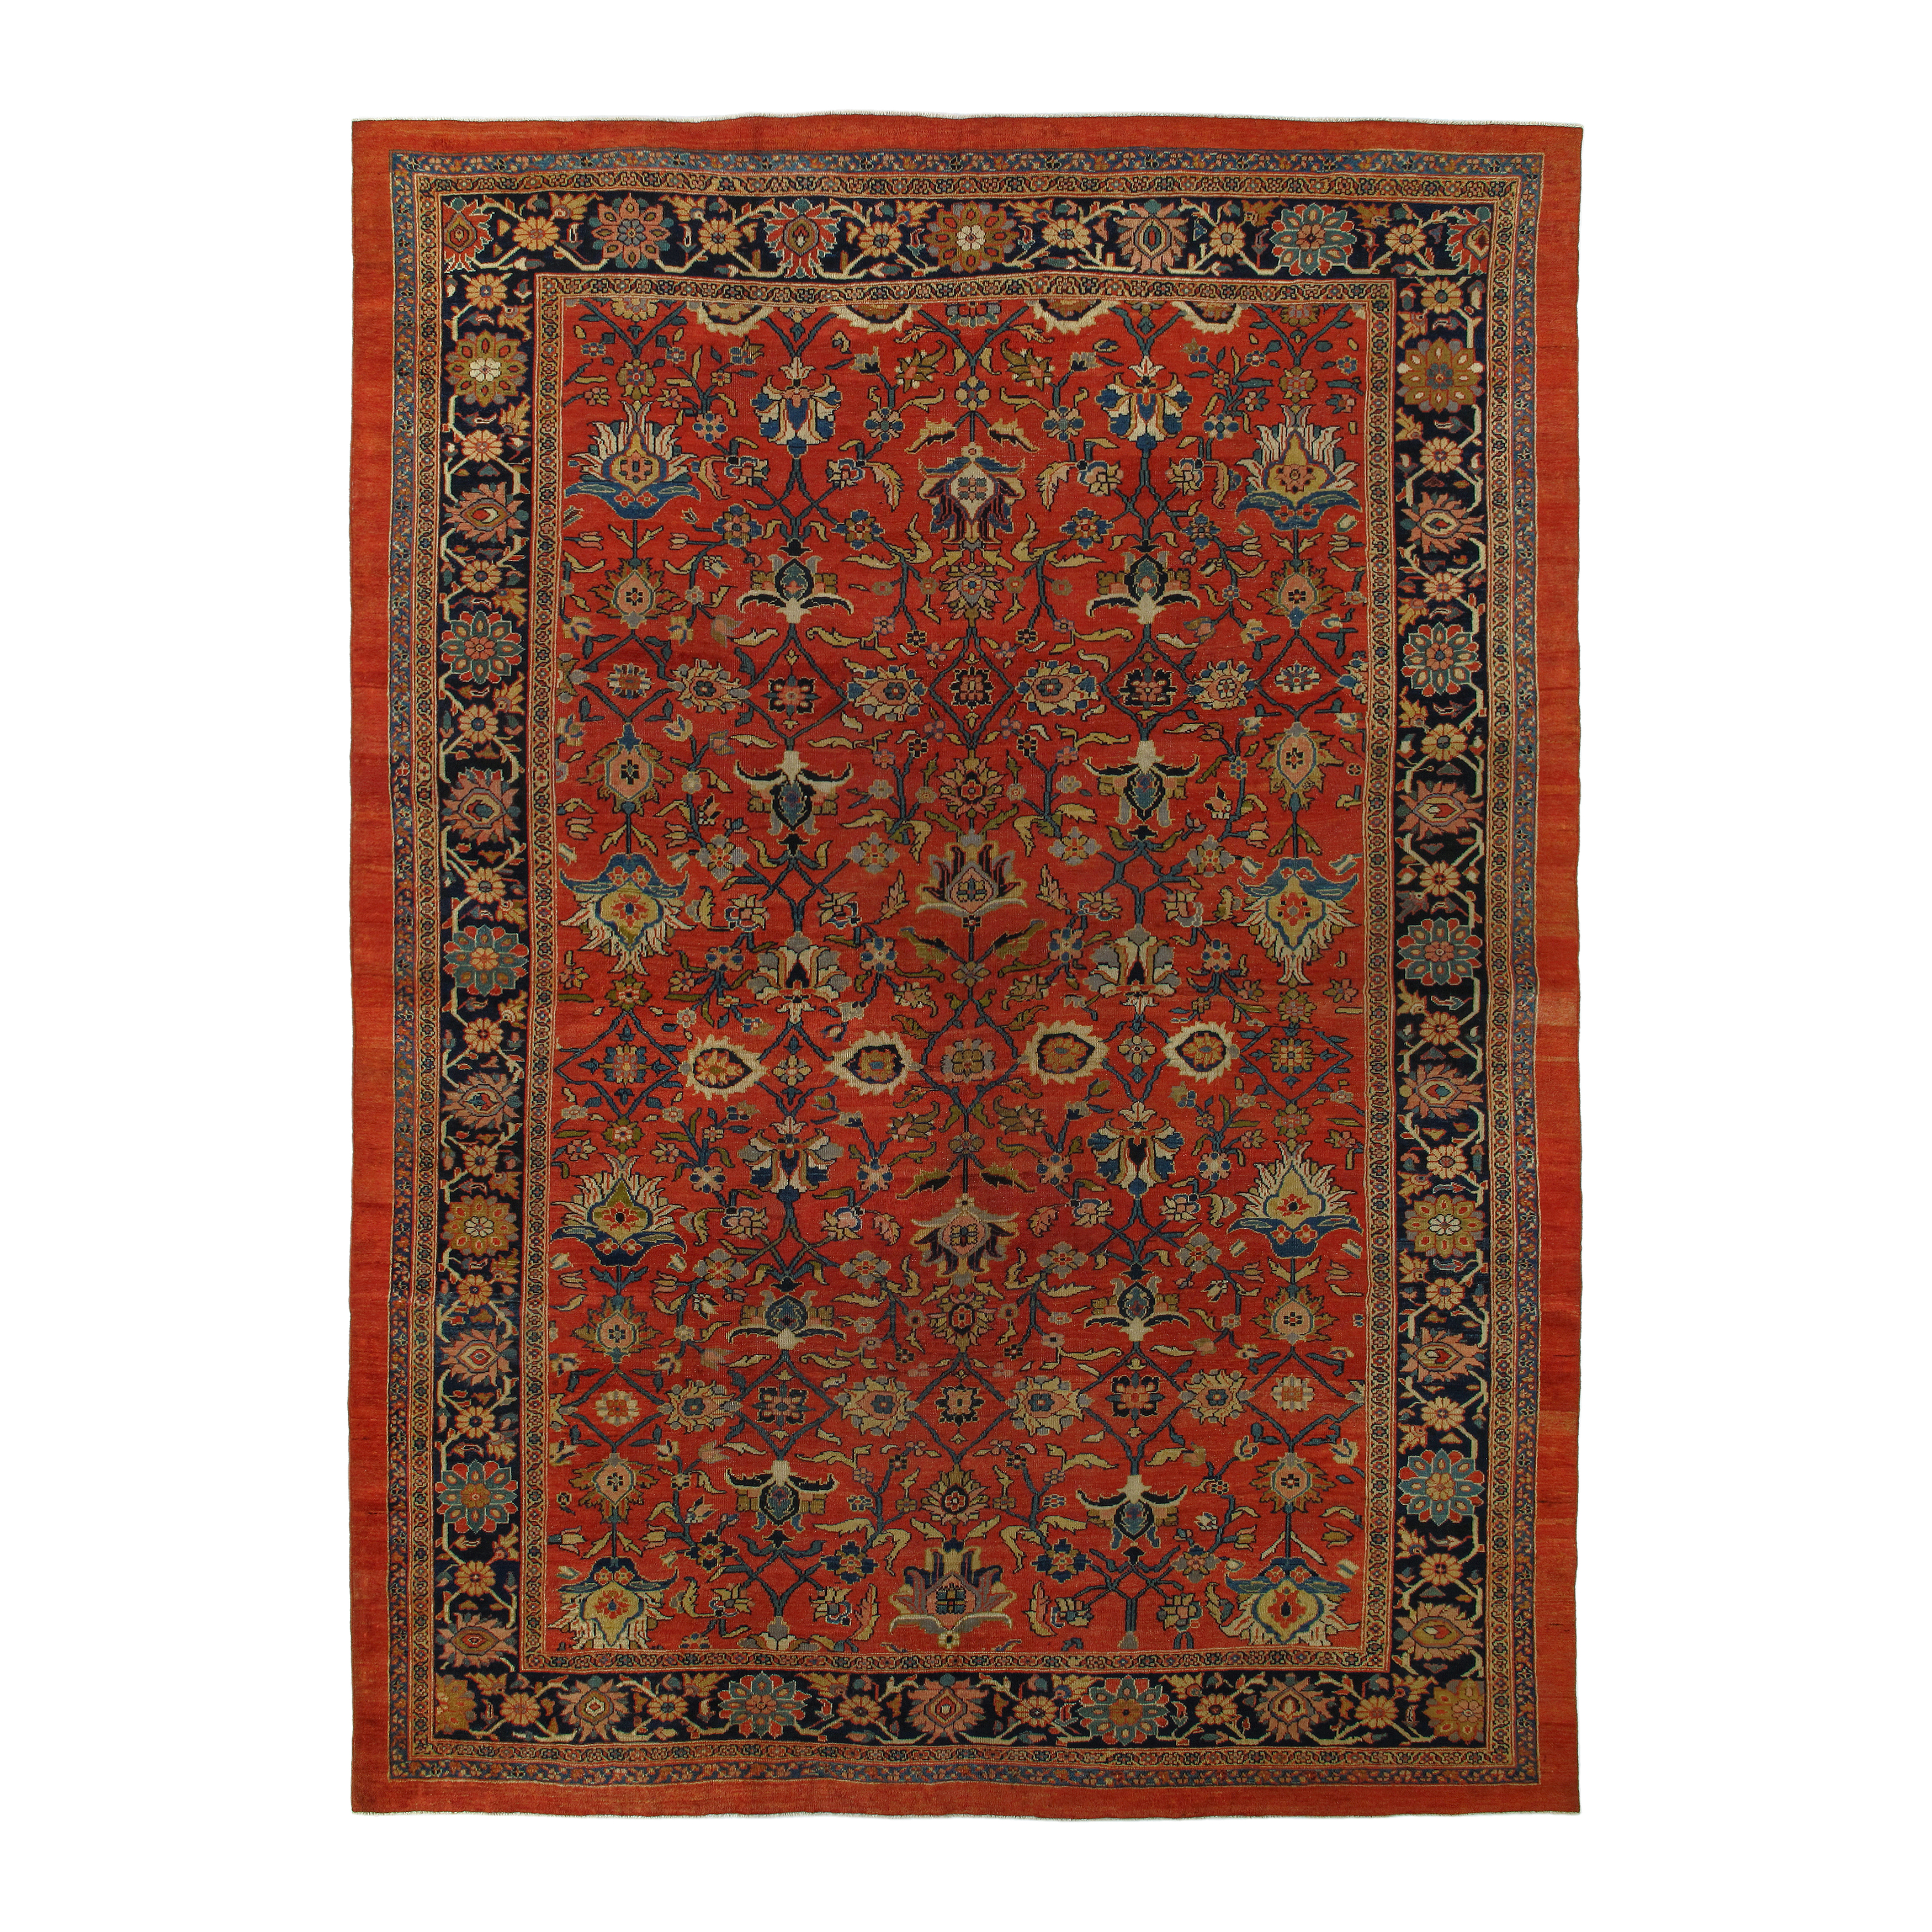 This Persian Mahal rugs is from major rug weaving area in central west Iran.